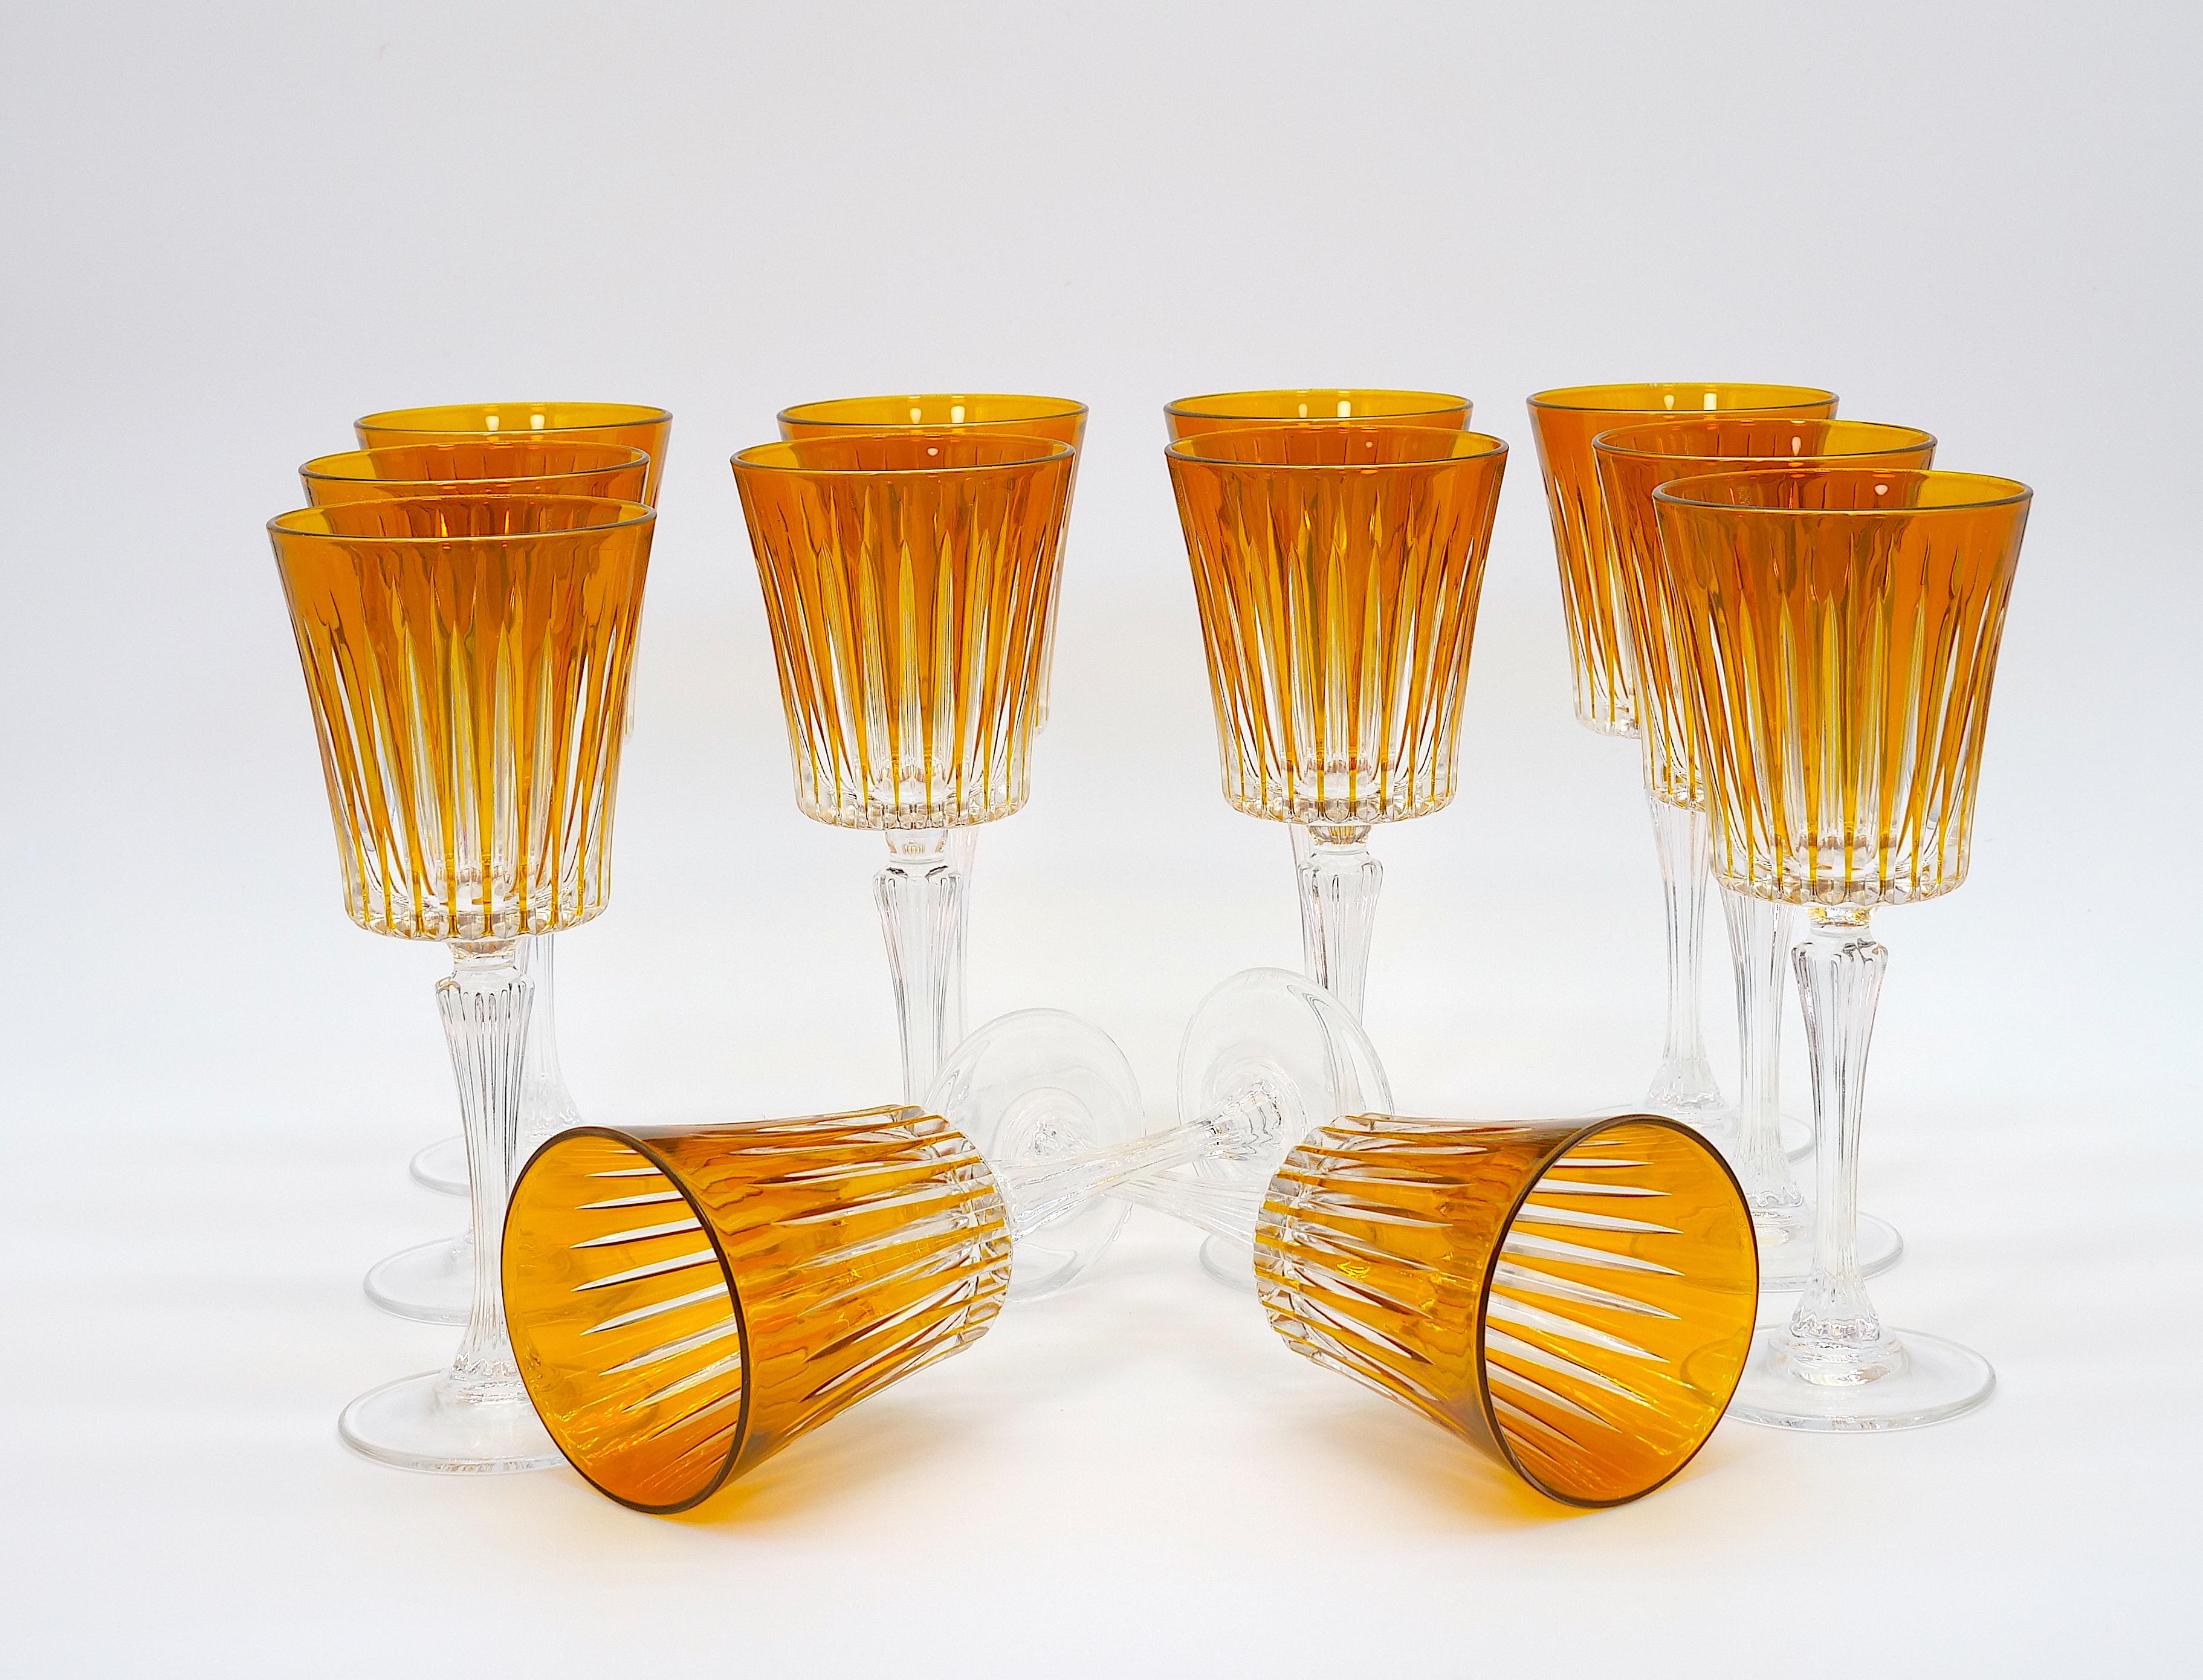 Beautiful orange color French cut crystal paneled design tableware or barware wine and water glassware service for 12 people. Each glass is in great condition. Maker's mark undersigned. Each glass is in excellent condition. Minor wear consistent